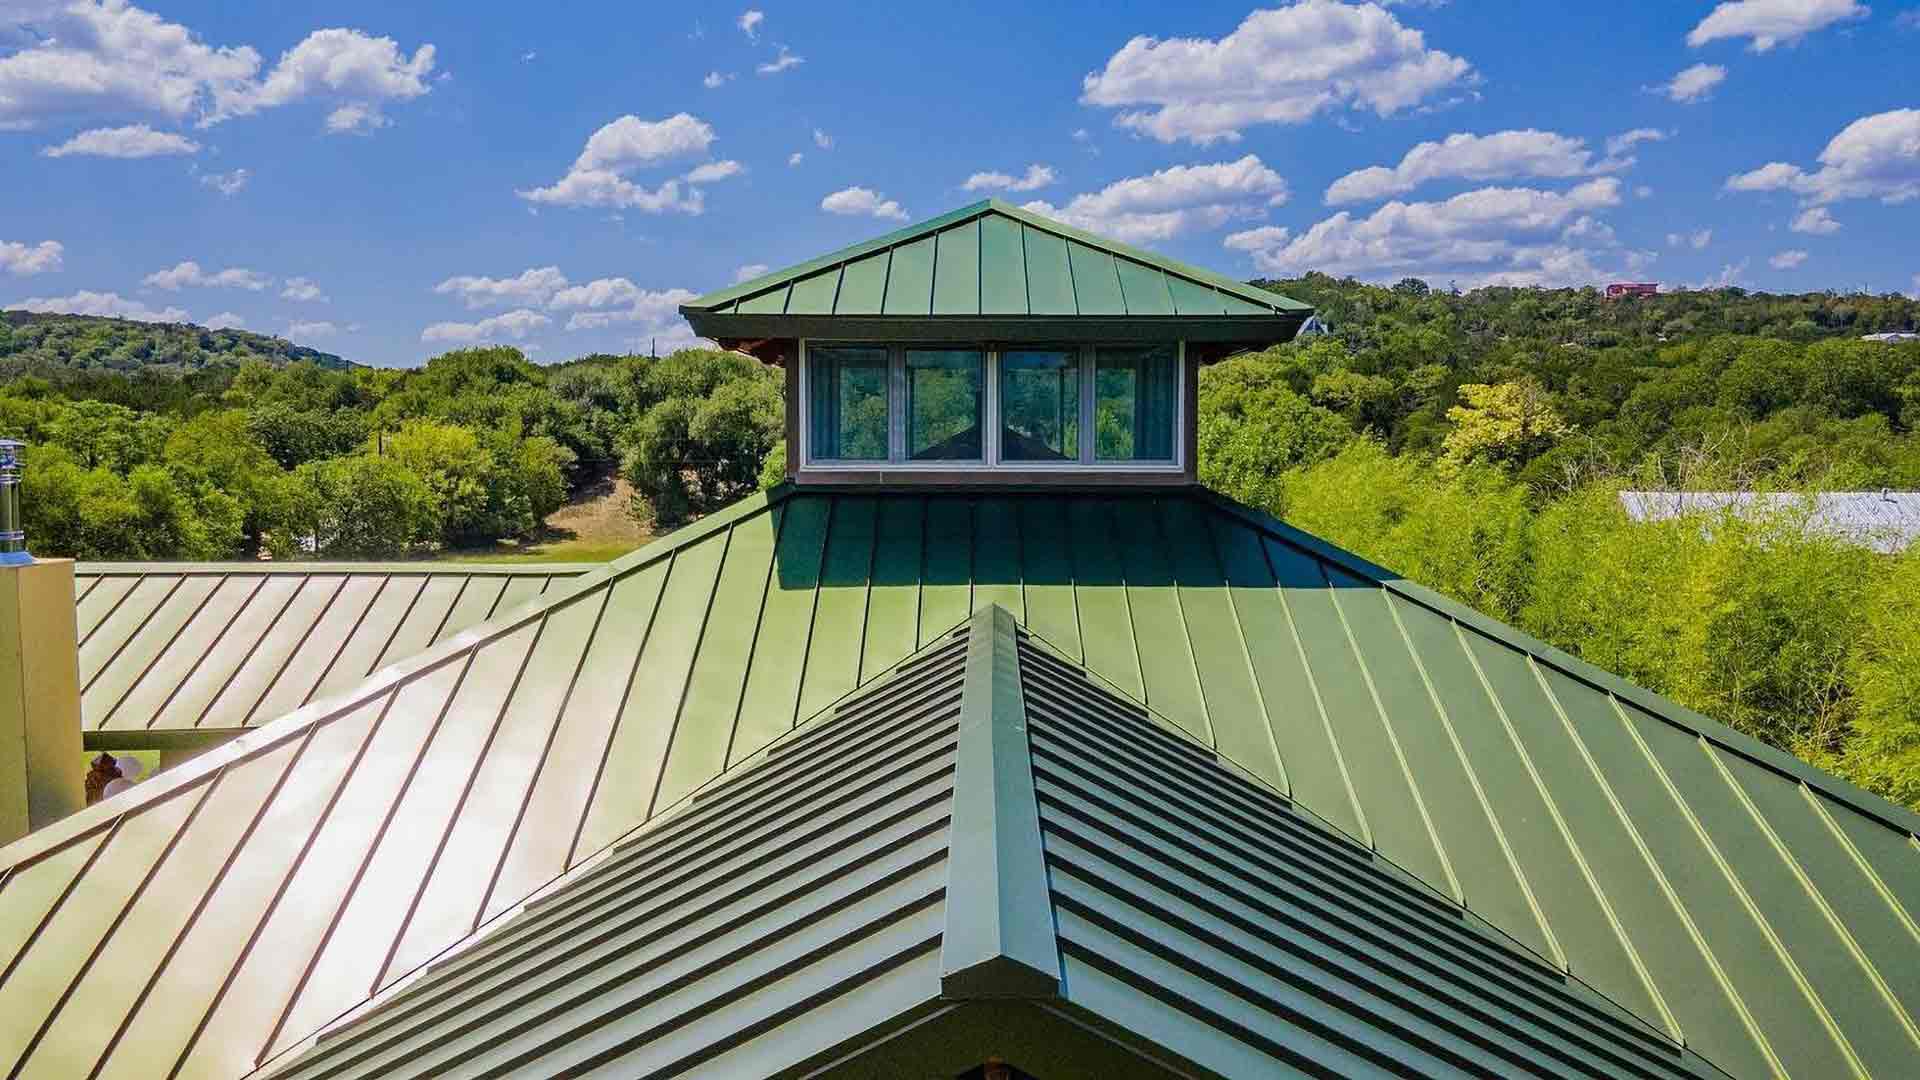 24-gauge-vs-26-gauge-metal-roofing-which-should-i-use-for-my-home